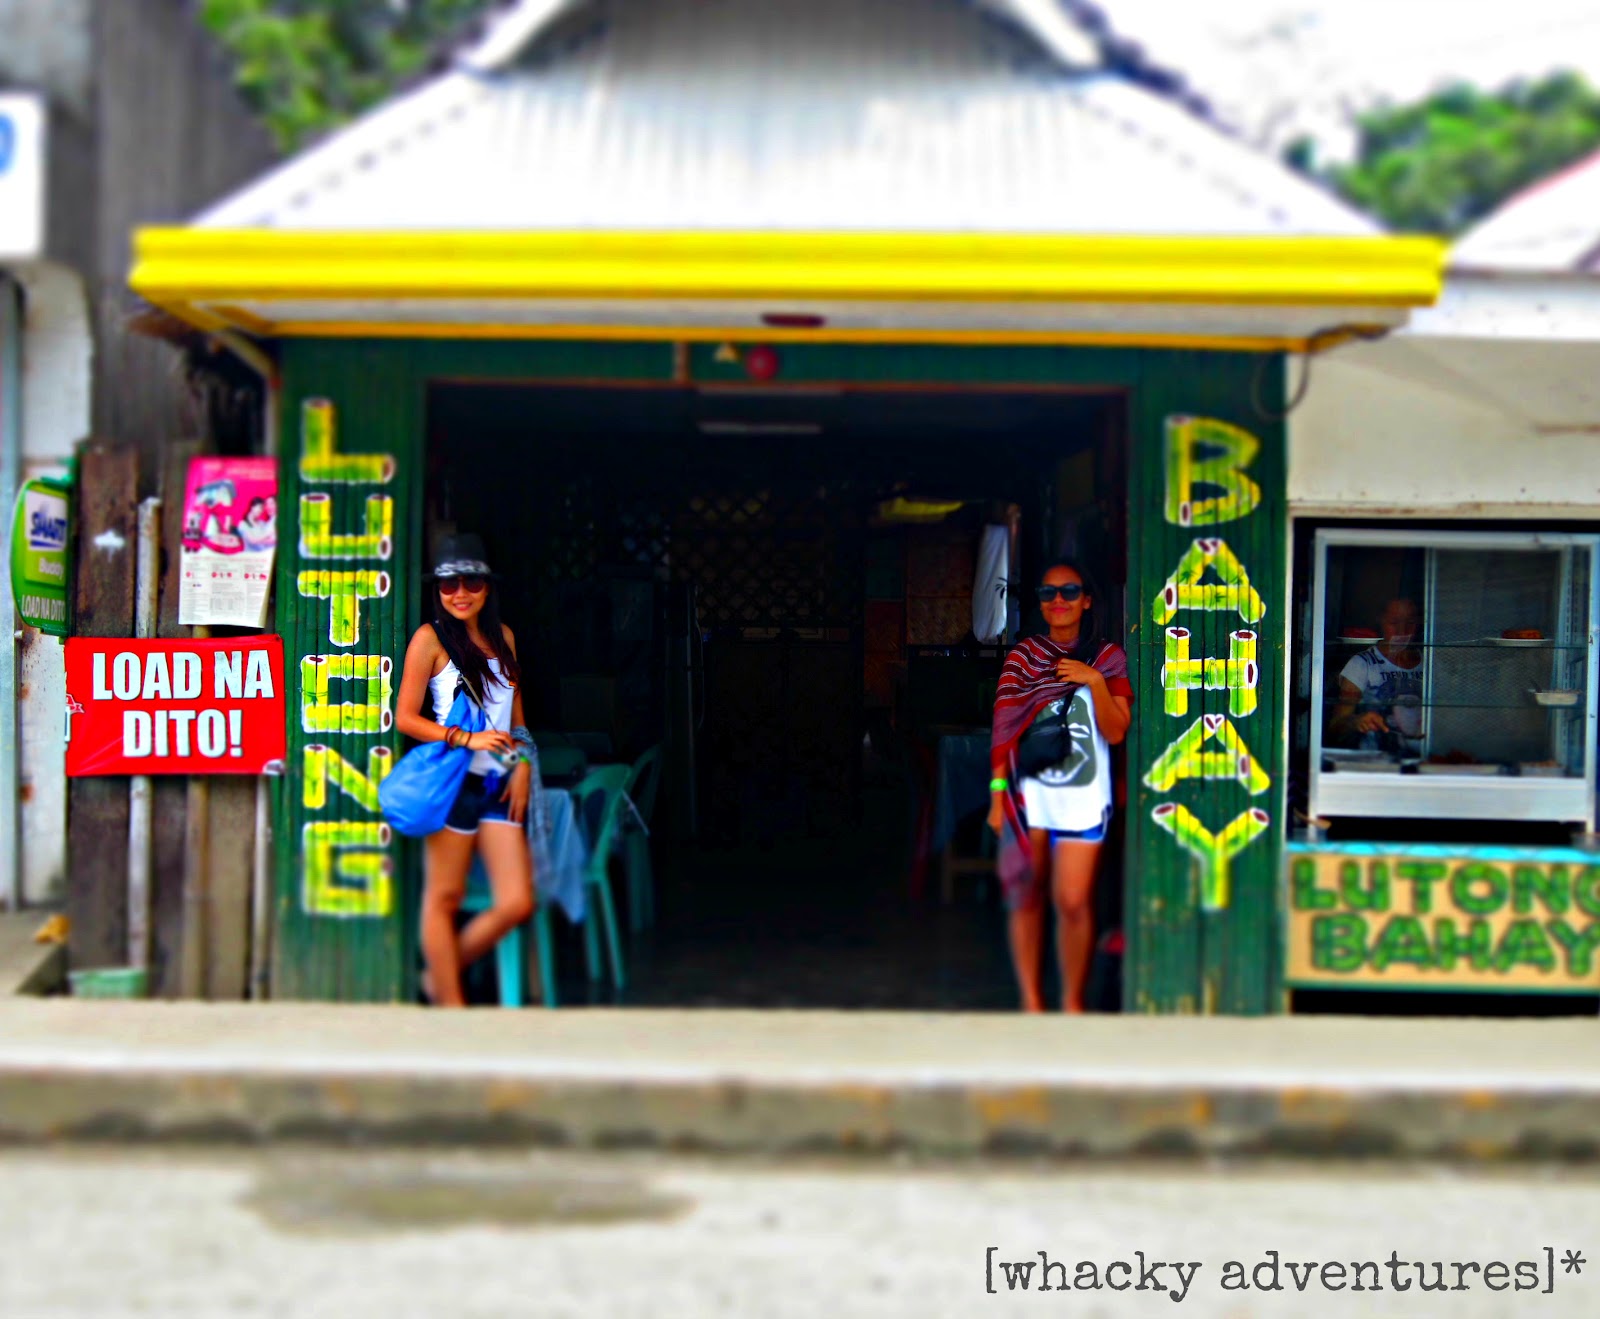 Whacky Adventures*: Bicol Express Day 3: One lazy afternoon in Caramoan